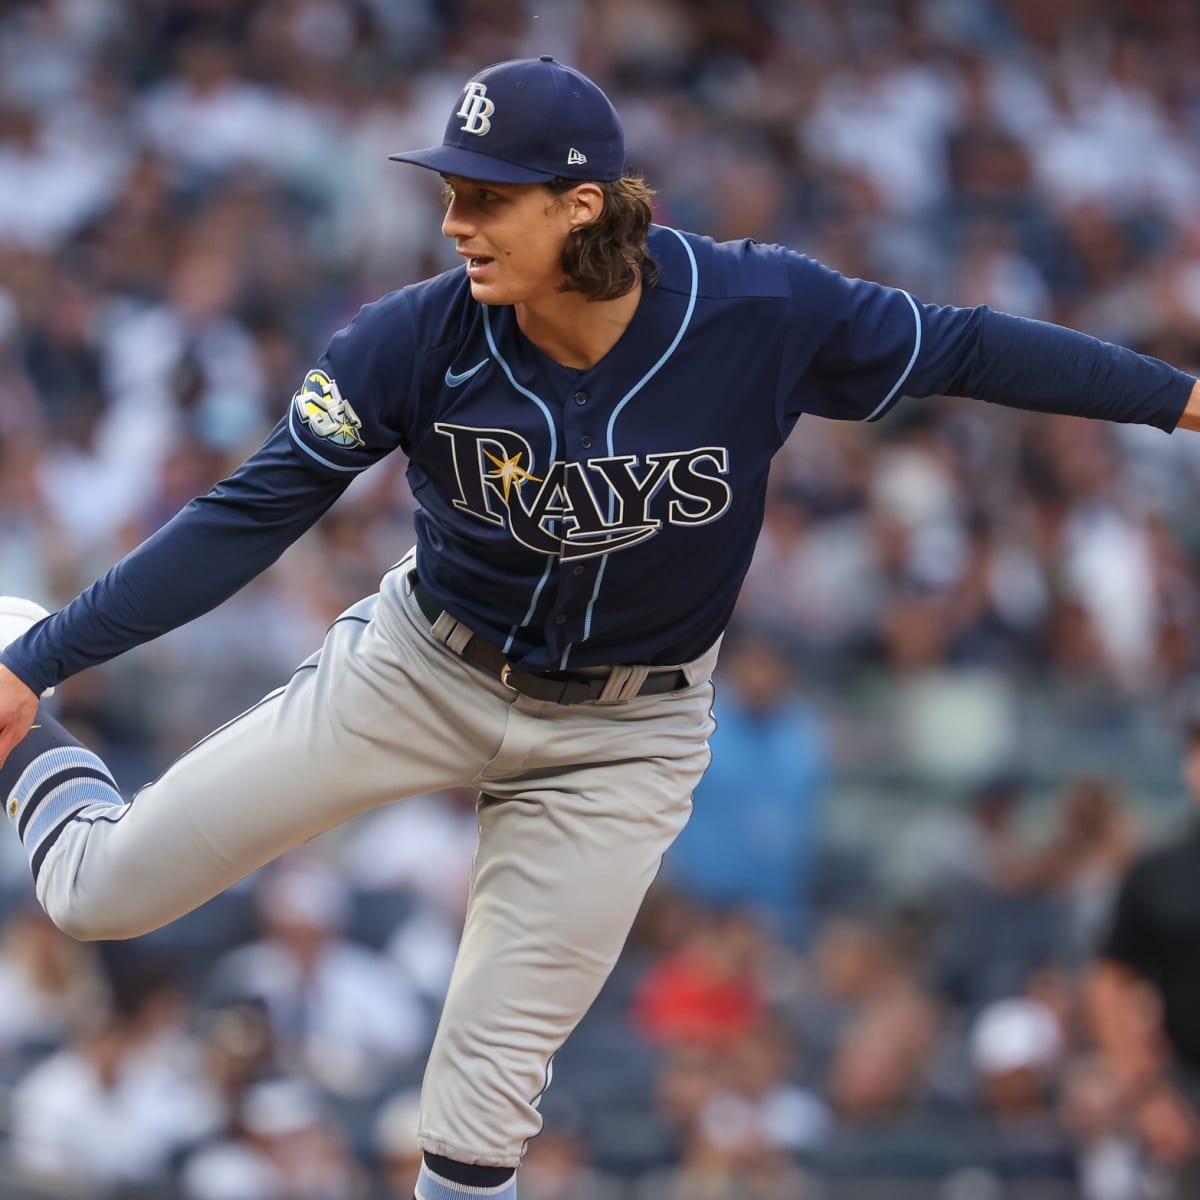 BY GOSH, THAT'S TYLER GLASNOW'S MUSIC. The Tampa Bay Rays have